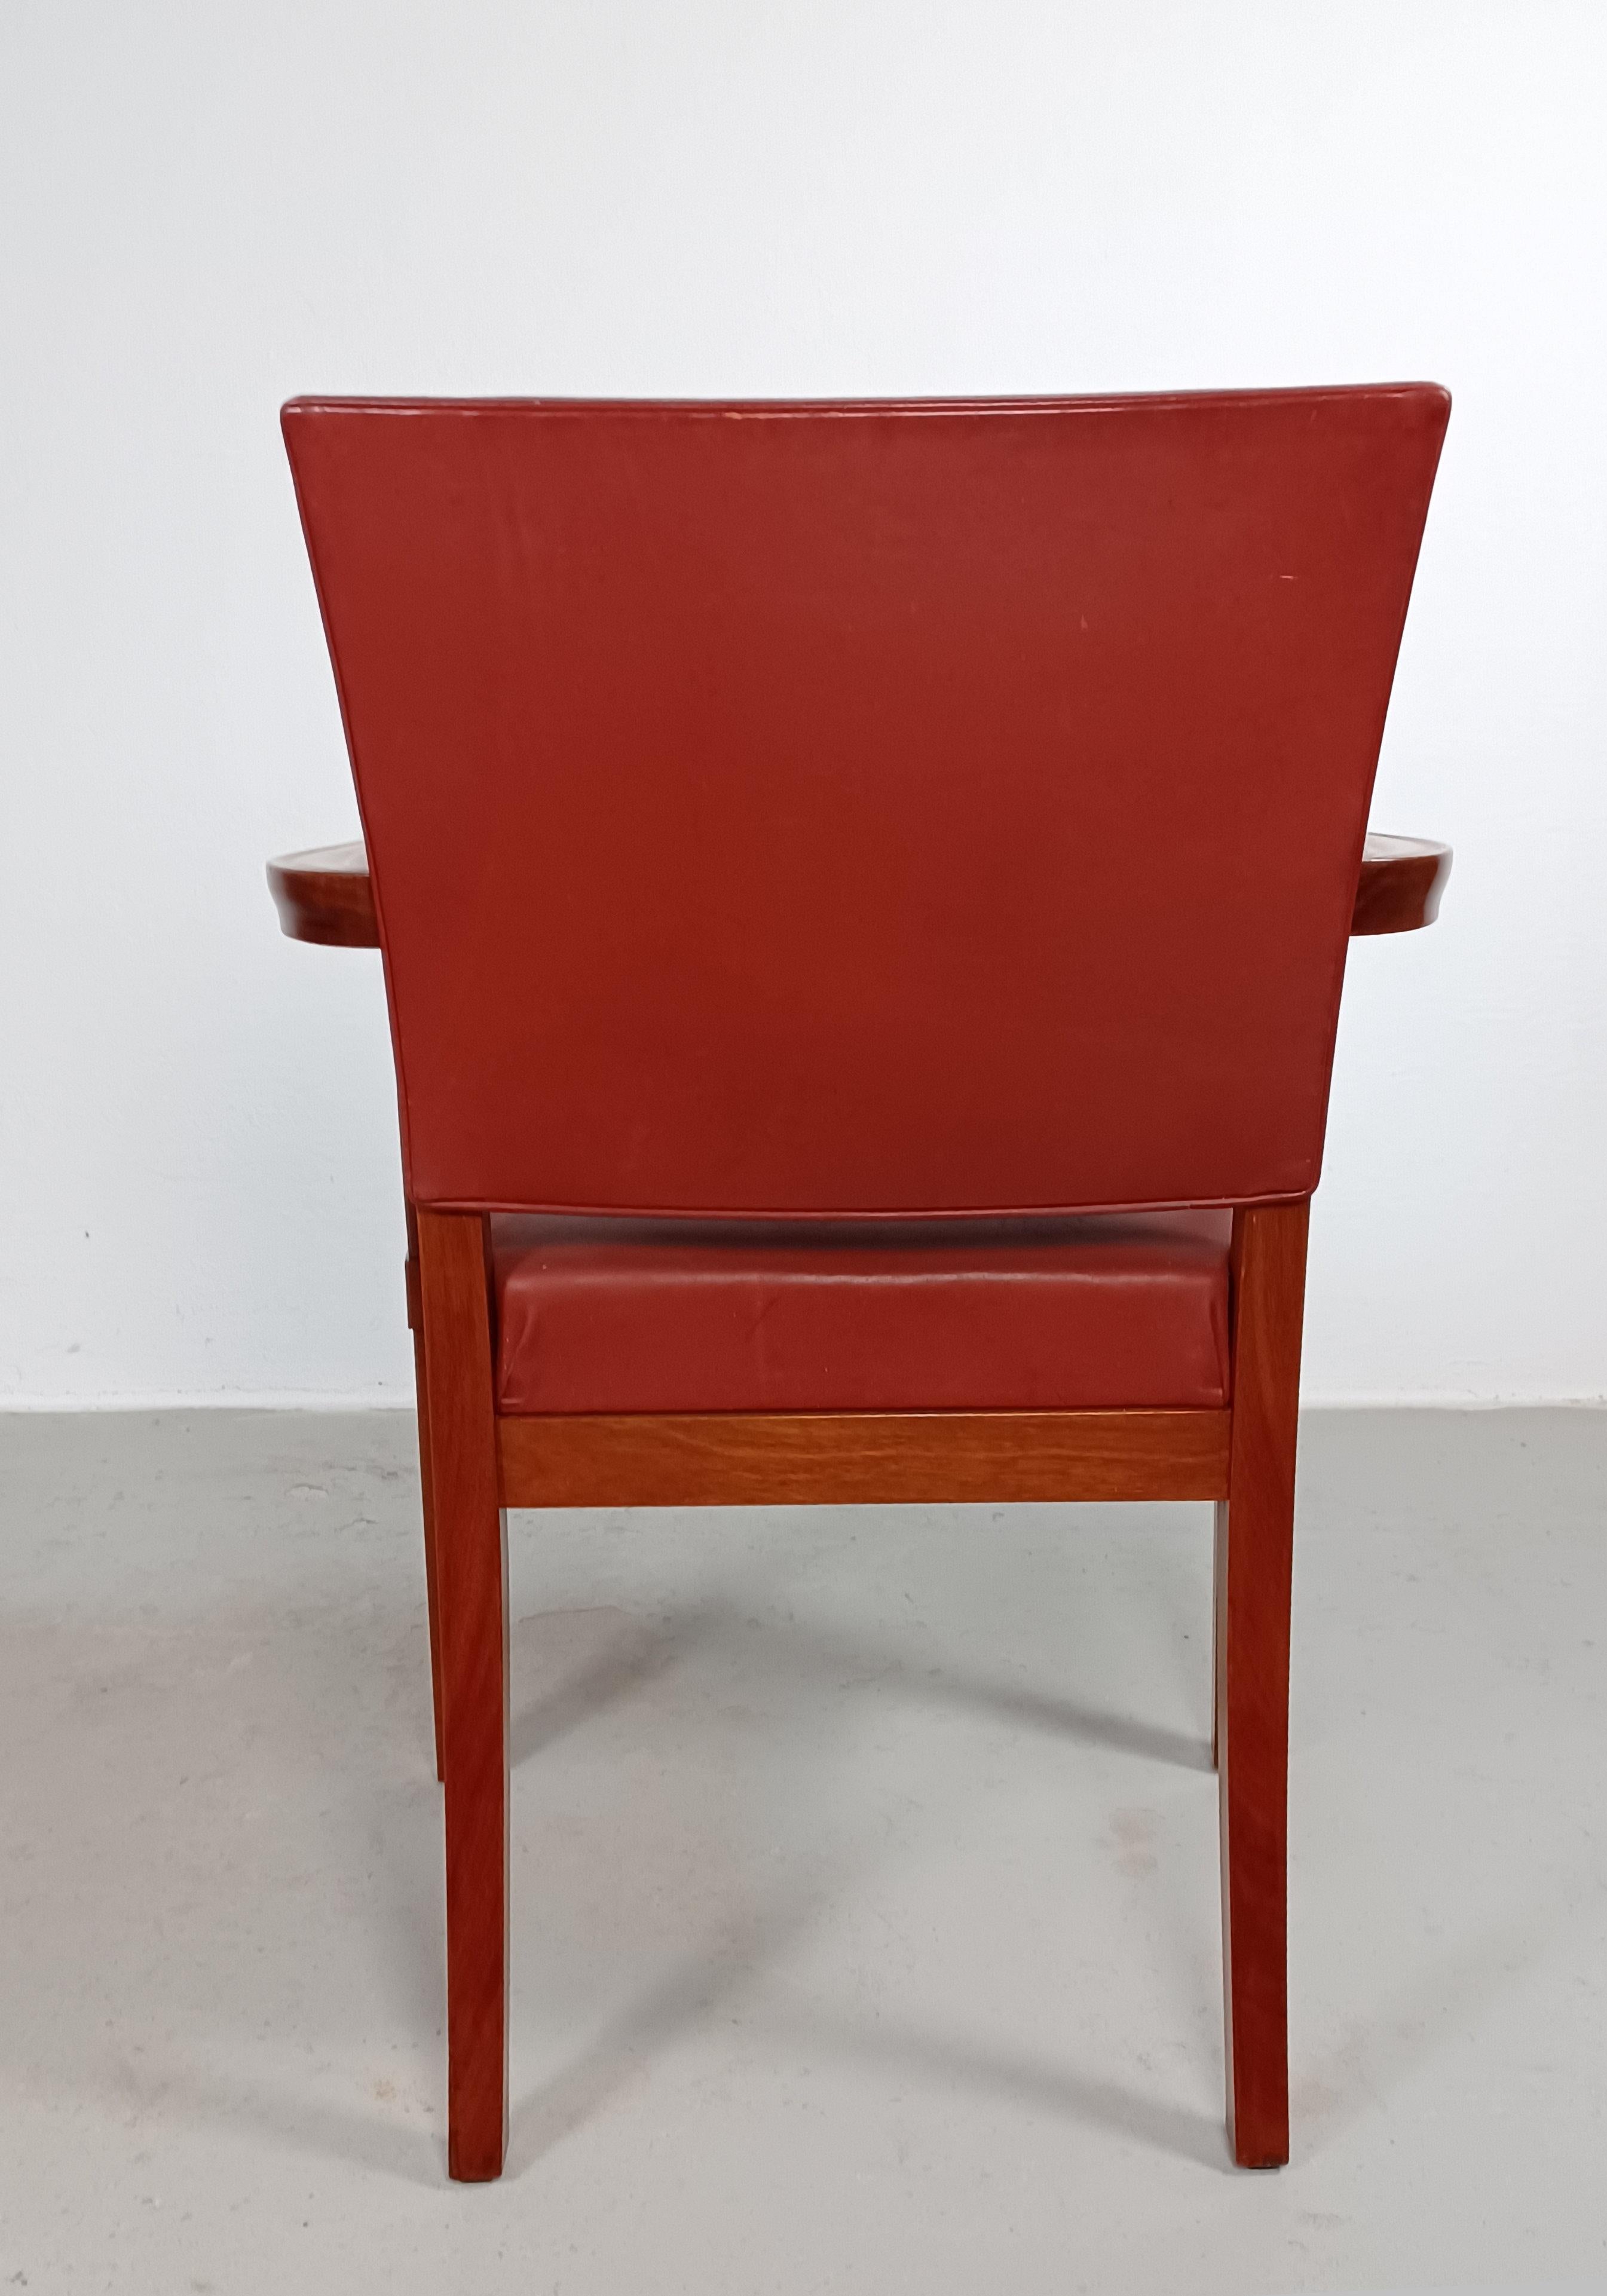 1935 Set of Two Restored Kaare Klint Barcelona or The Red Chair by Rud Rasmussen For Sale 1